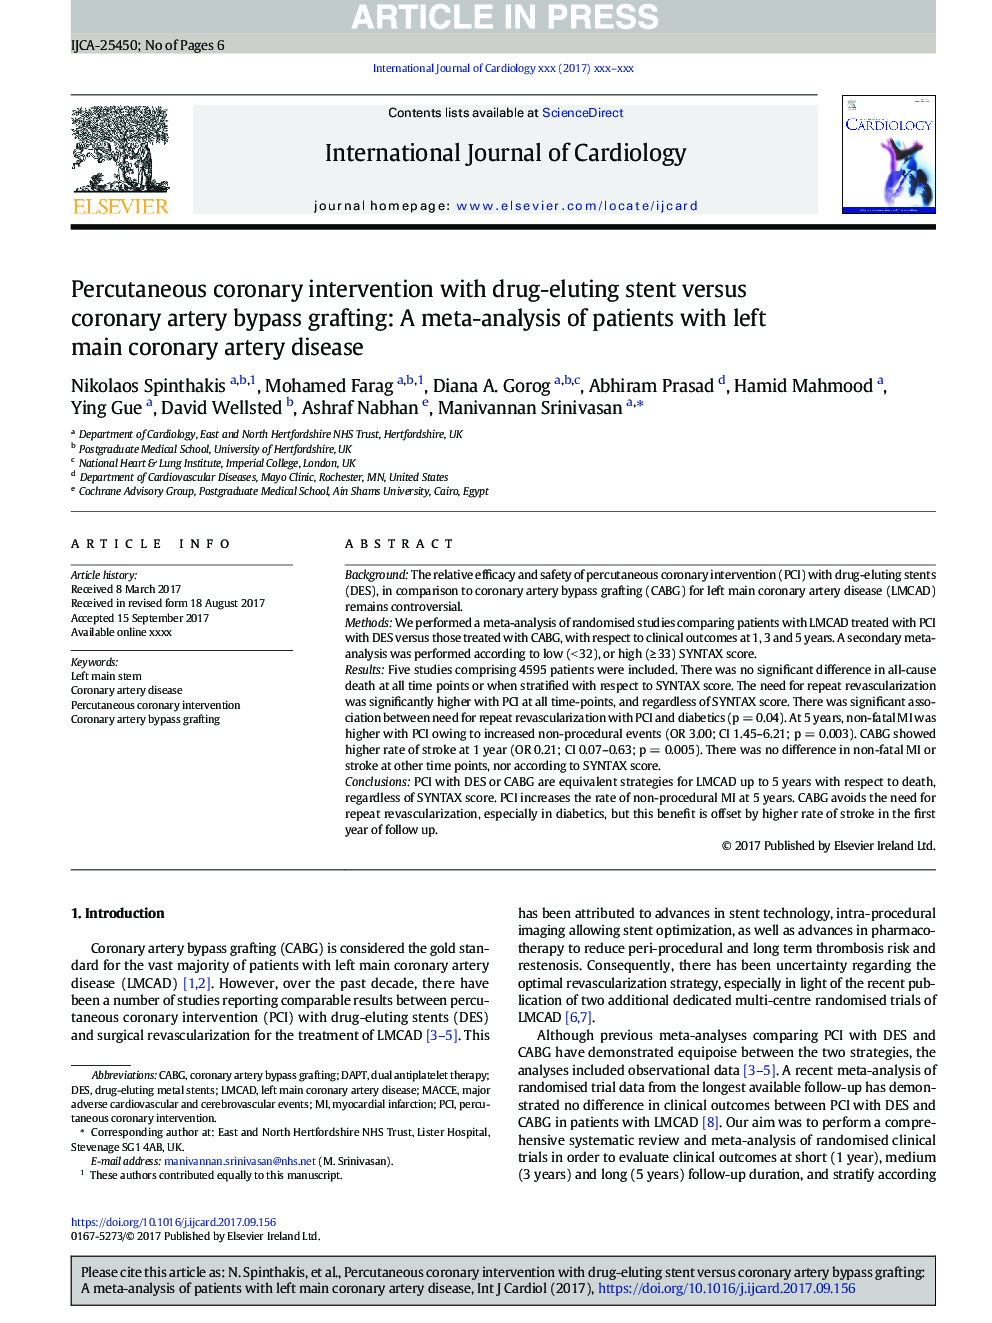 Percutaneous coronary intervention with drug-eluting stent versus coronary artery bypass grafting: A meta-analysis of patients with left main coronary artery disease